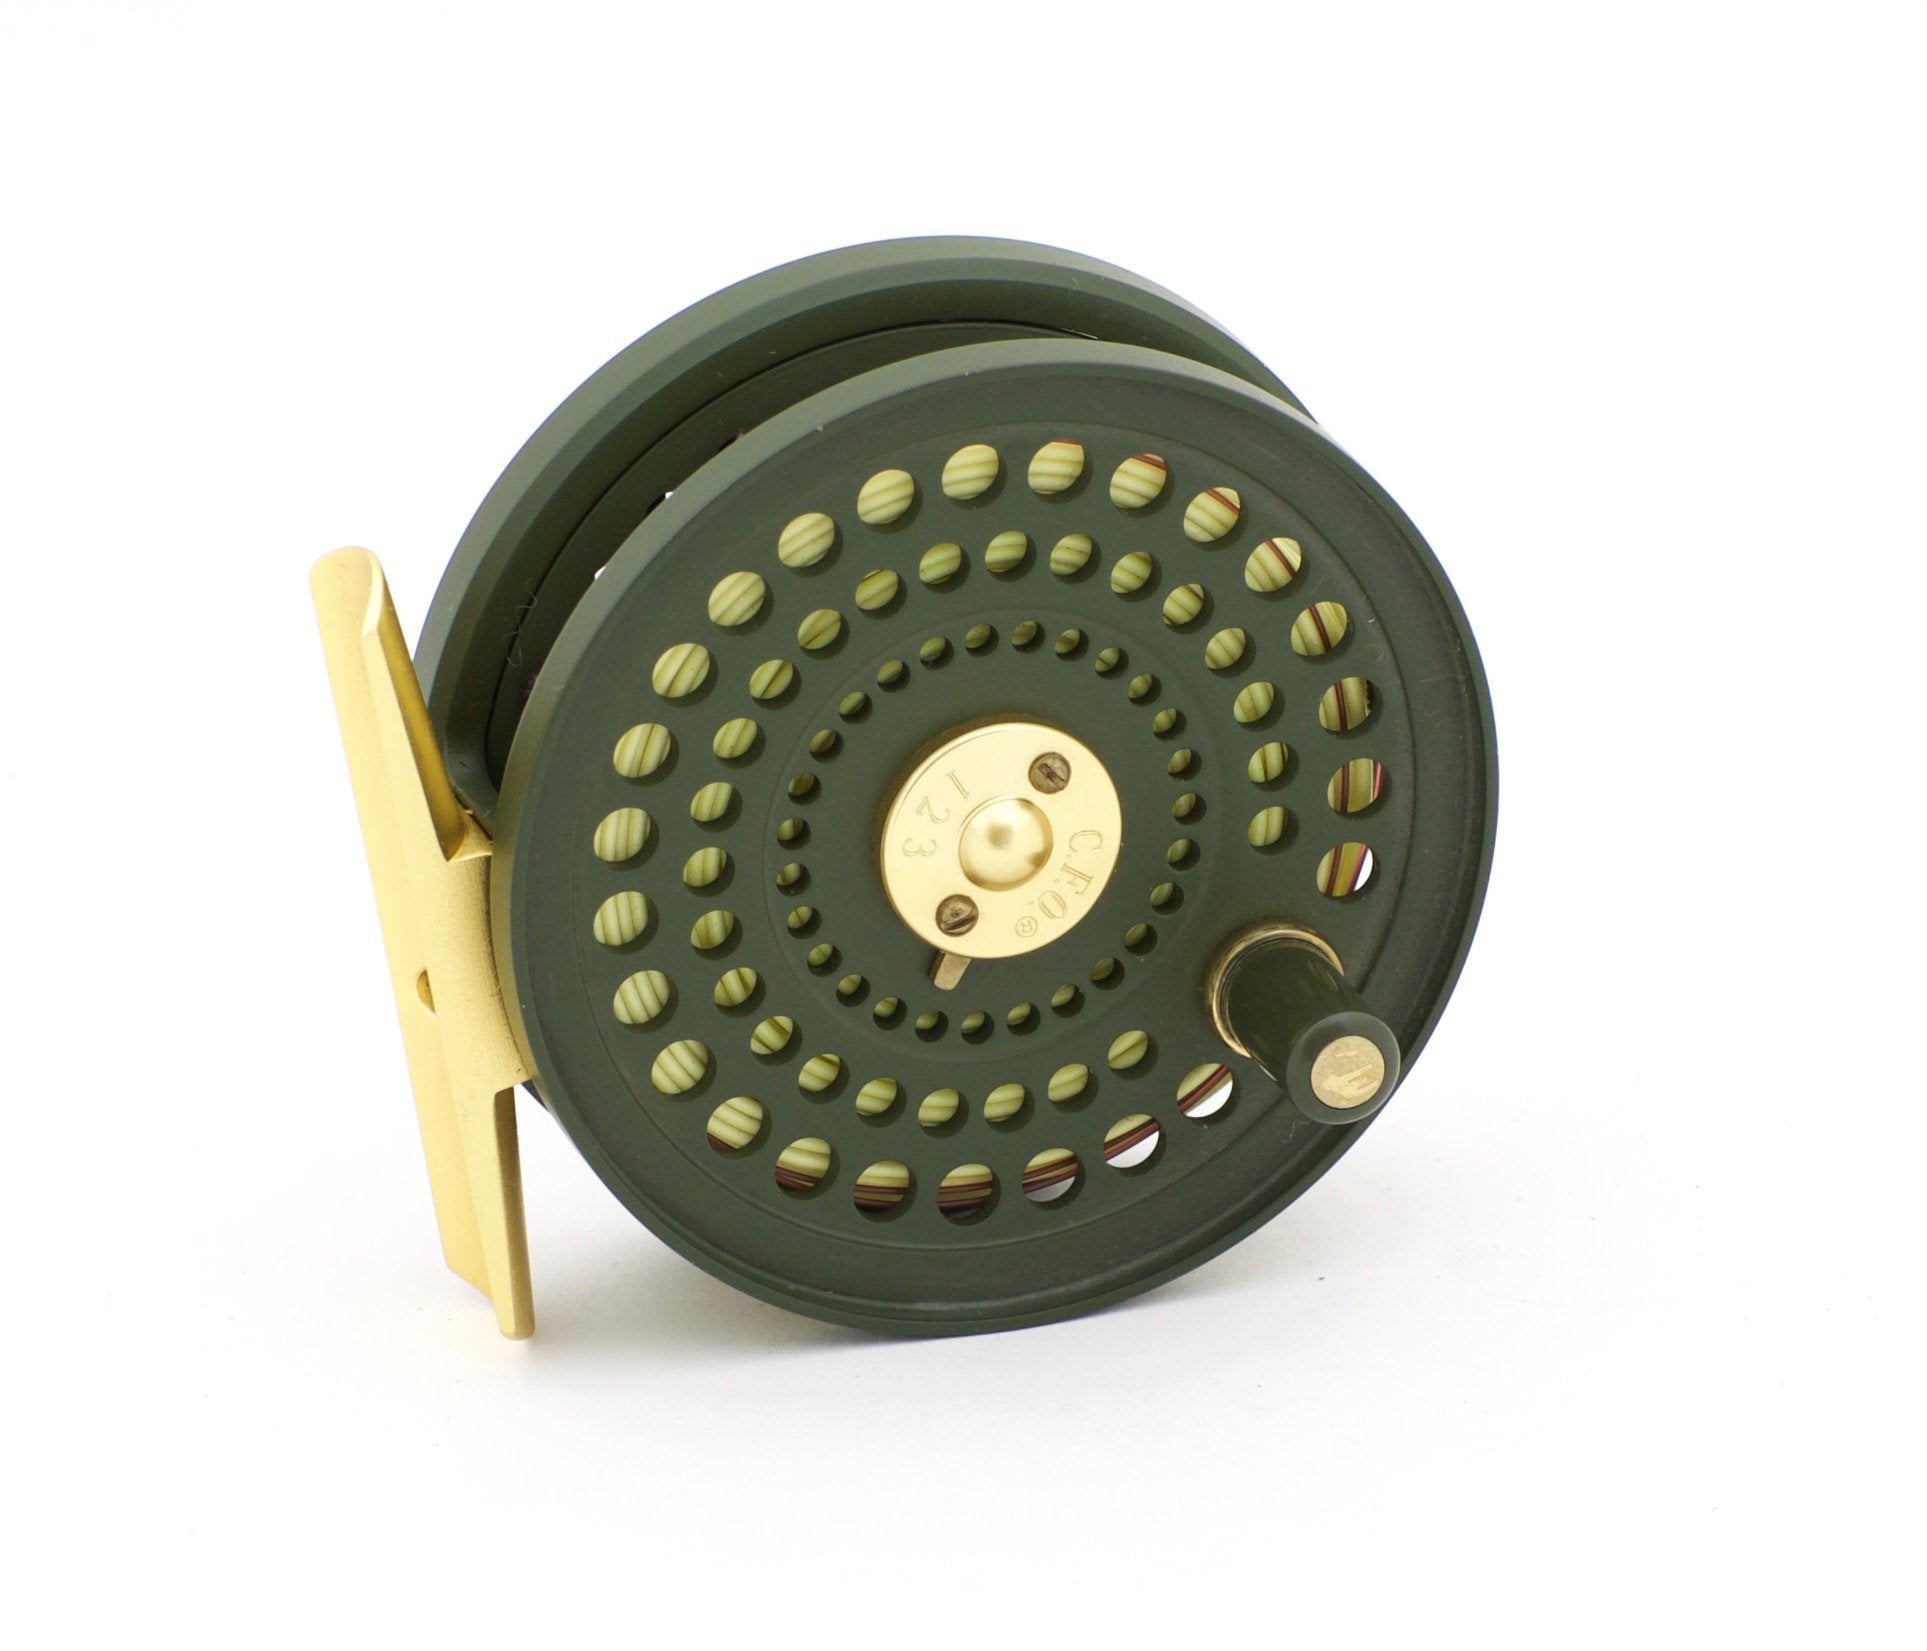 Orvis CFO 123 Limited Edition Fly Reel and Two Spare Spools